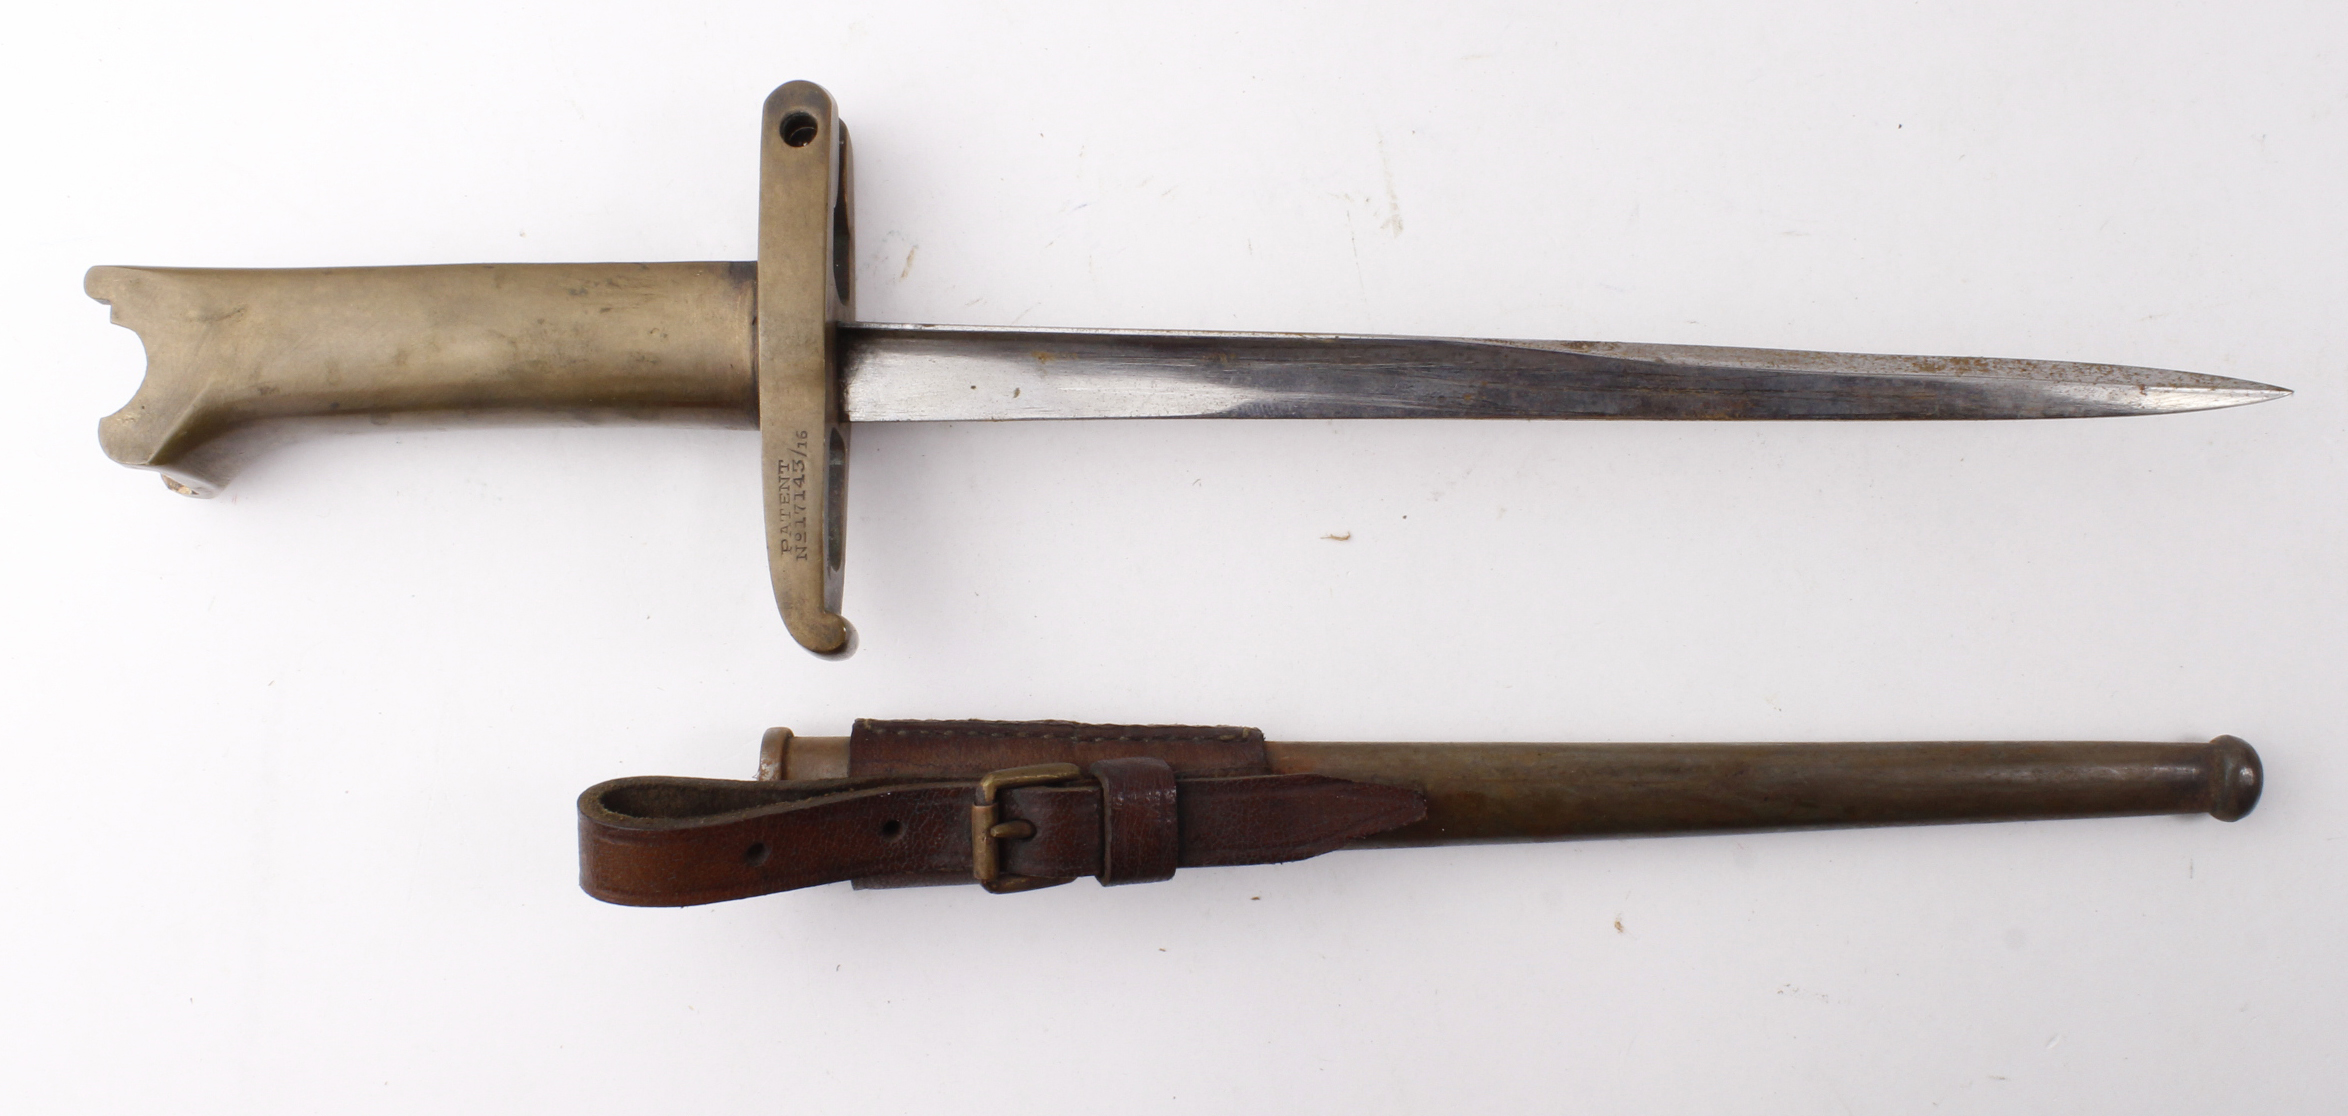 Webley MK6 Bayonet with metal scabbard and leather frog, cross guard maker marked 'Patent No17143/